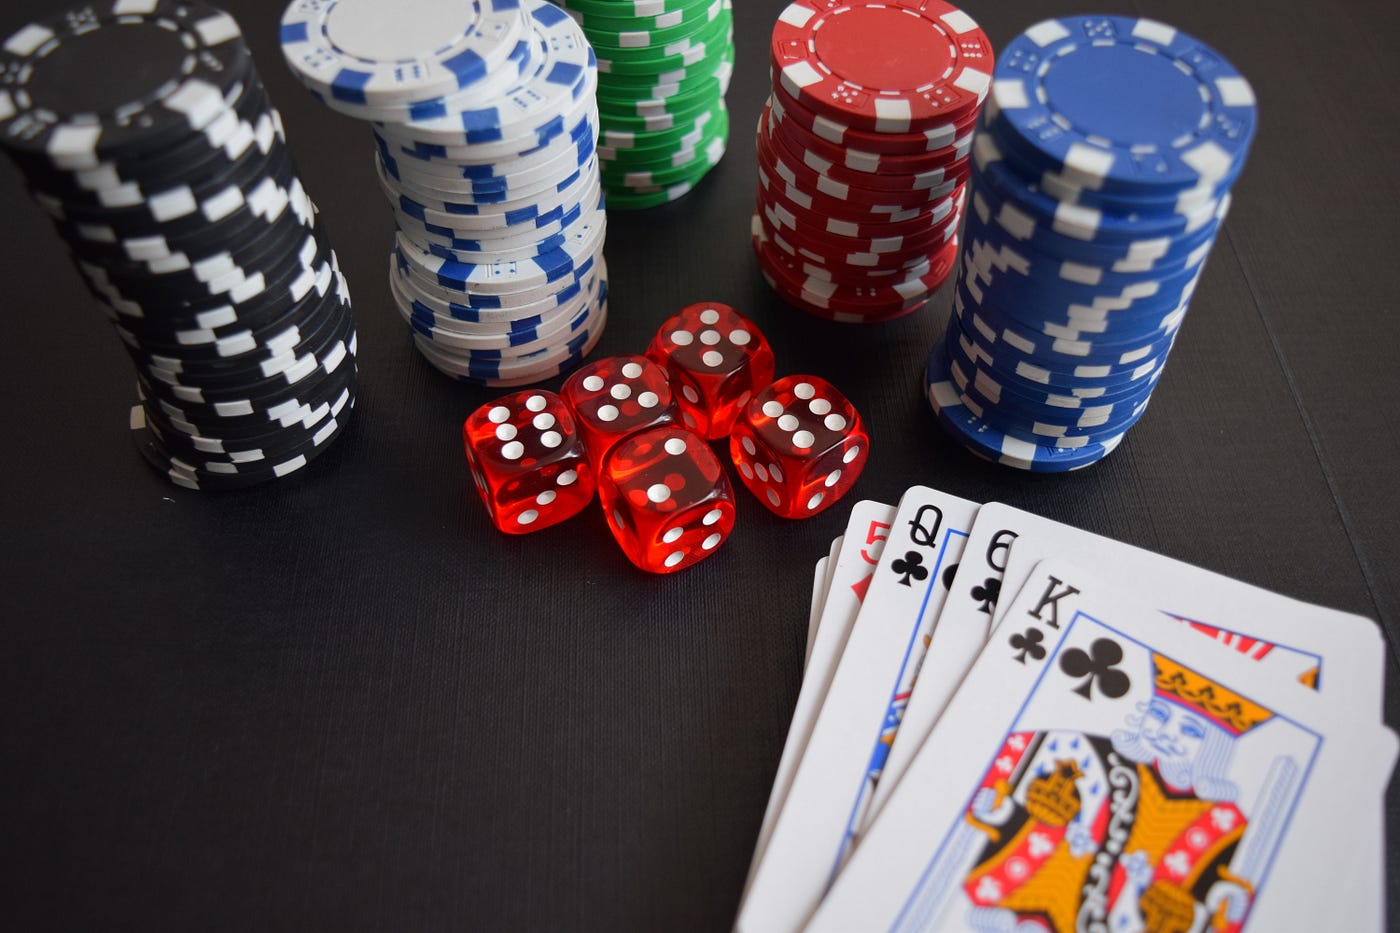 Illustration of probability in games and gambling